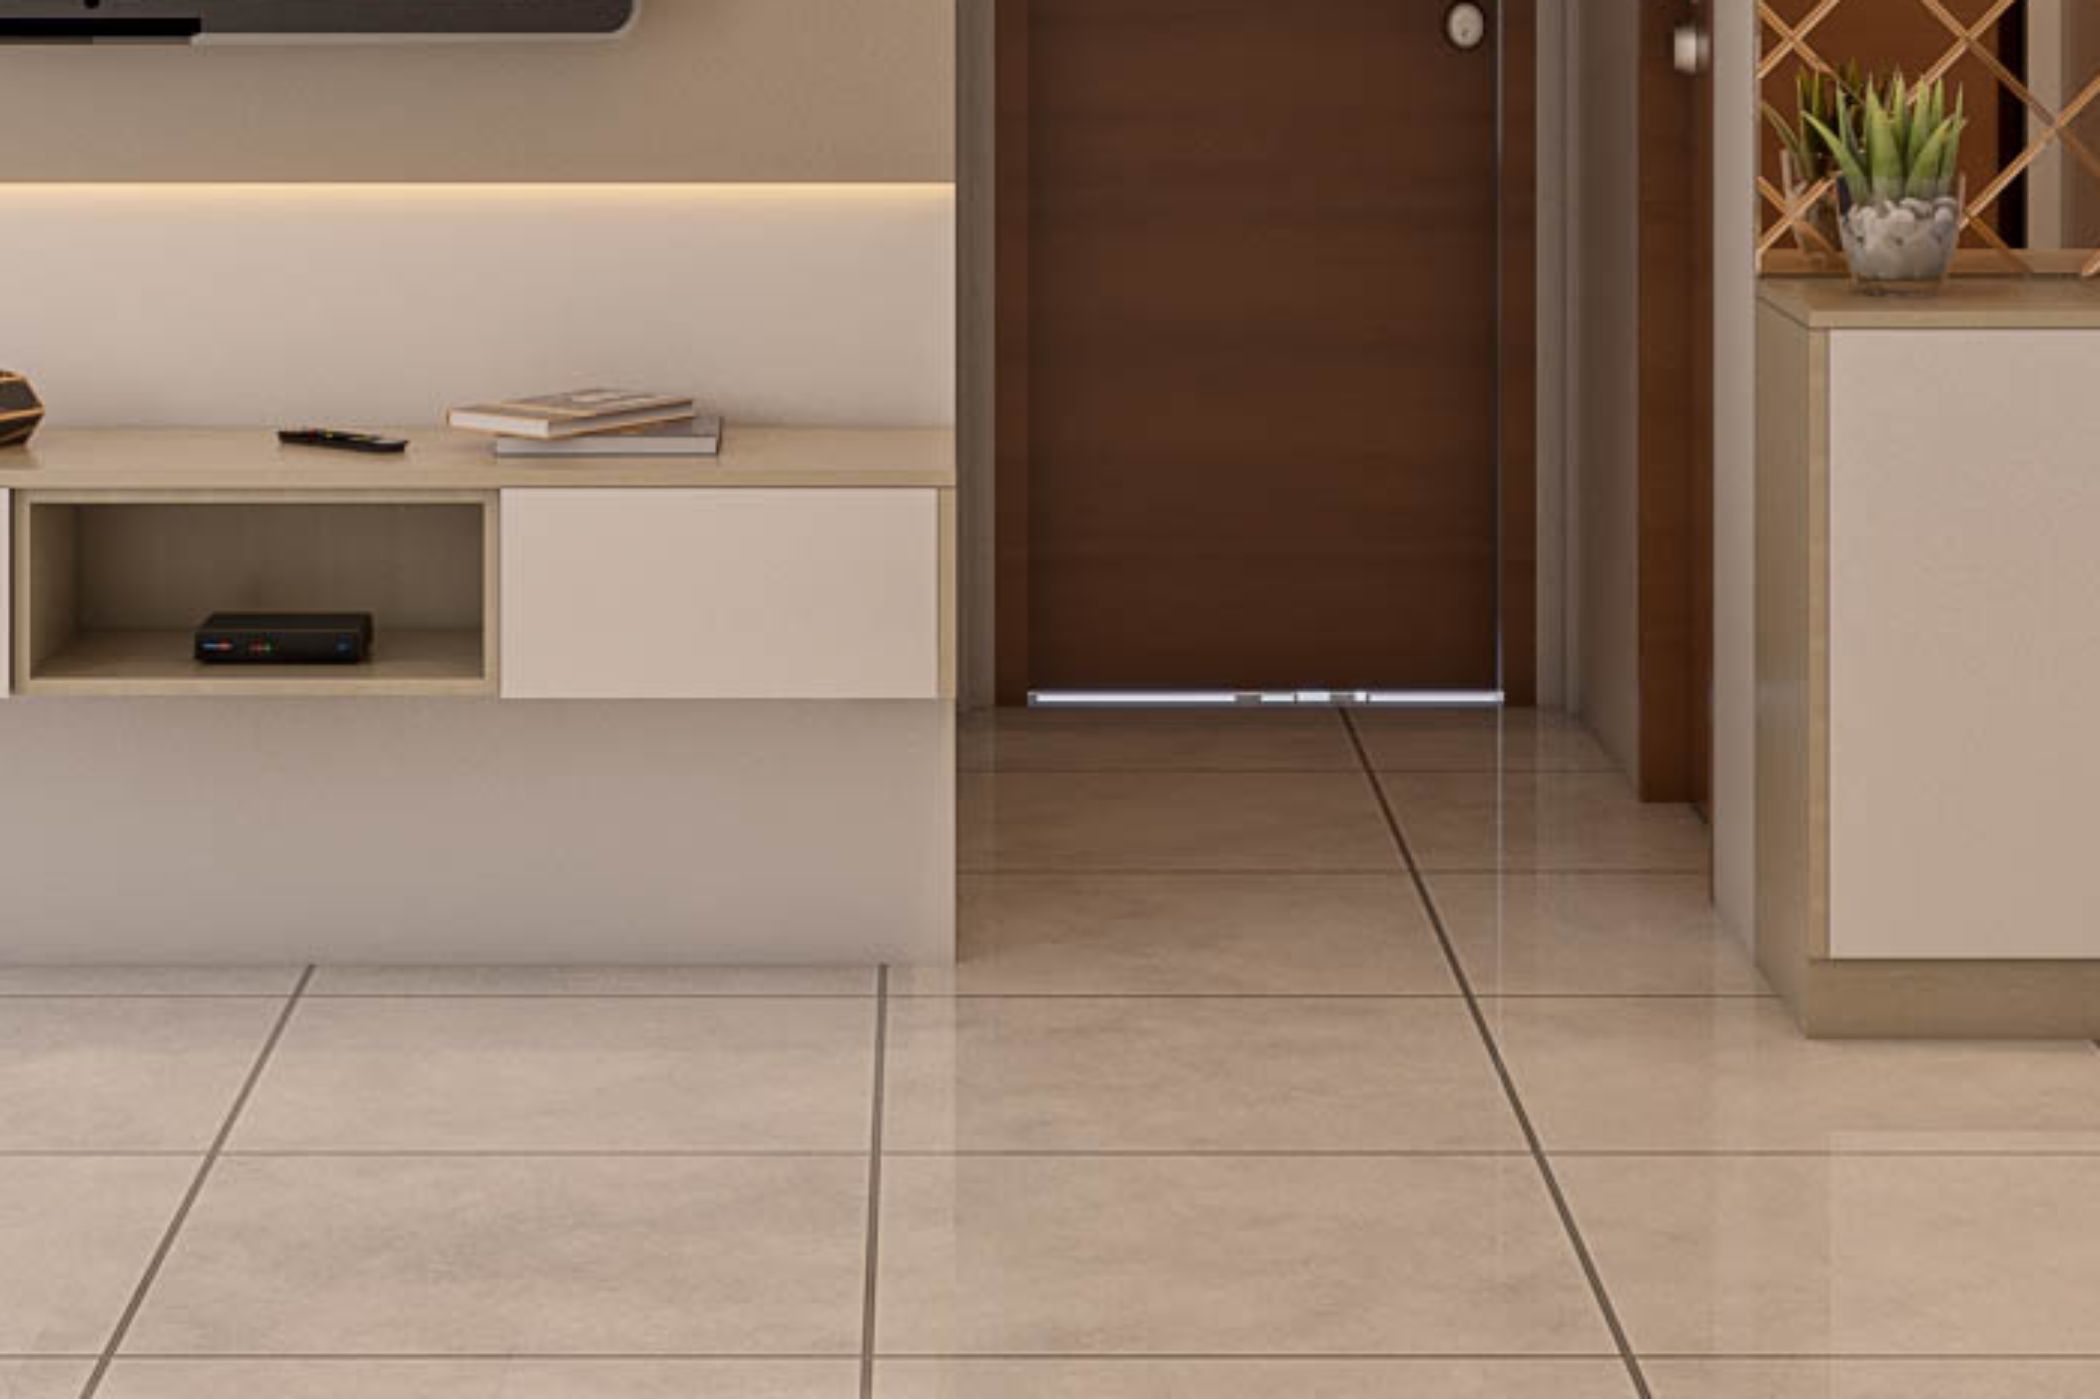 Durable Ceramic Tiles Design With A Glossy Finish